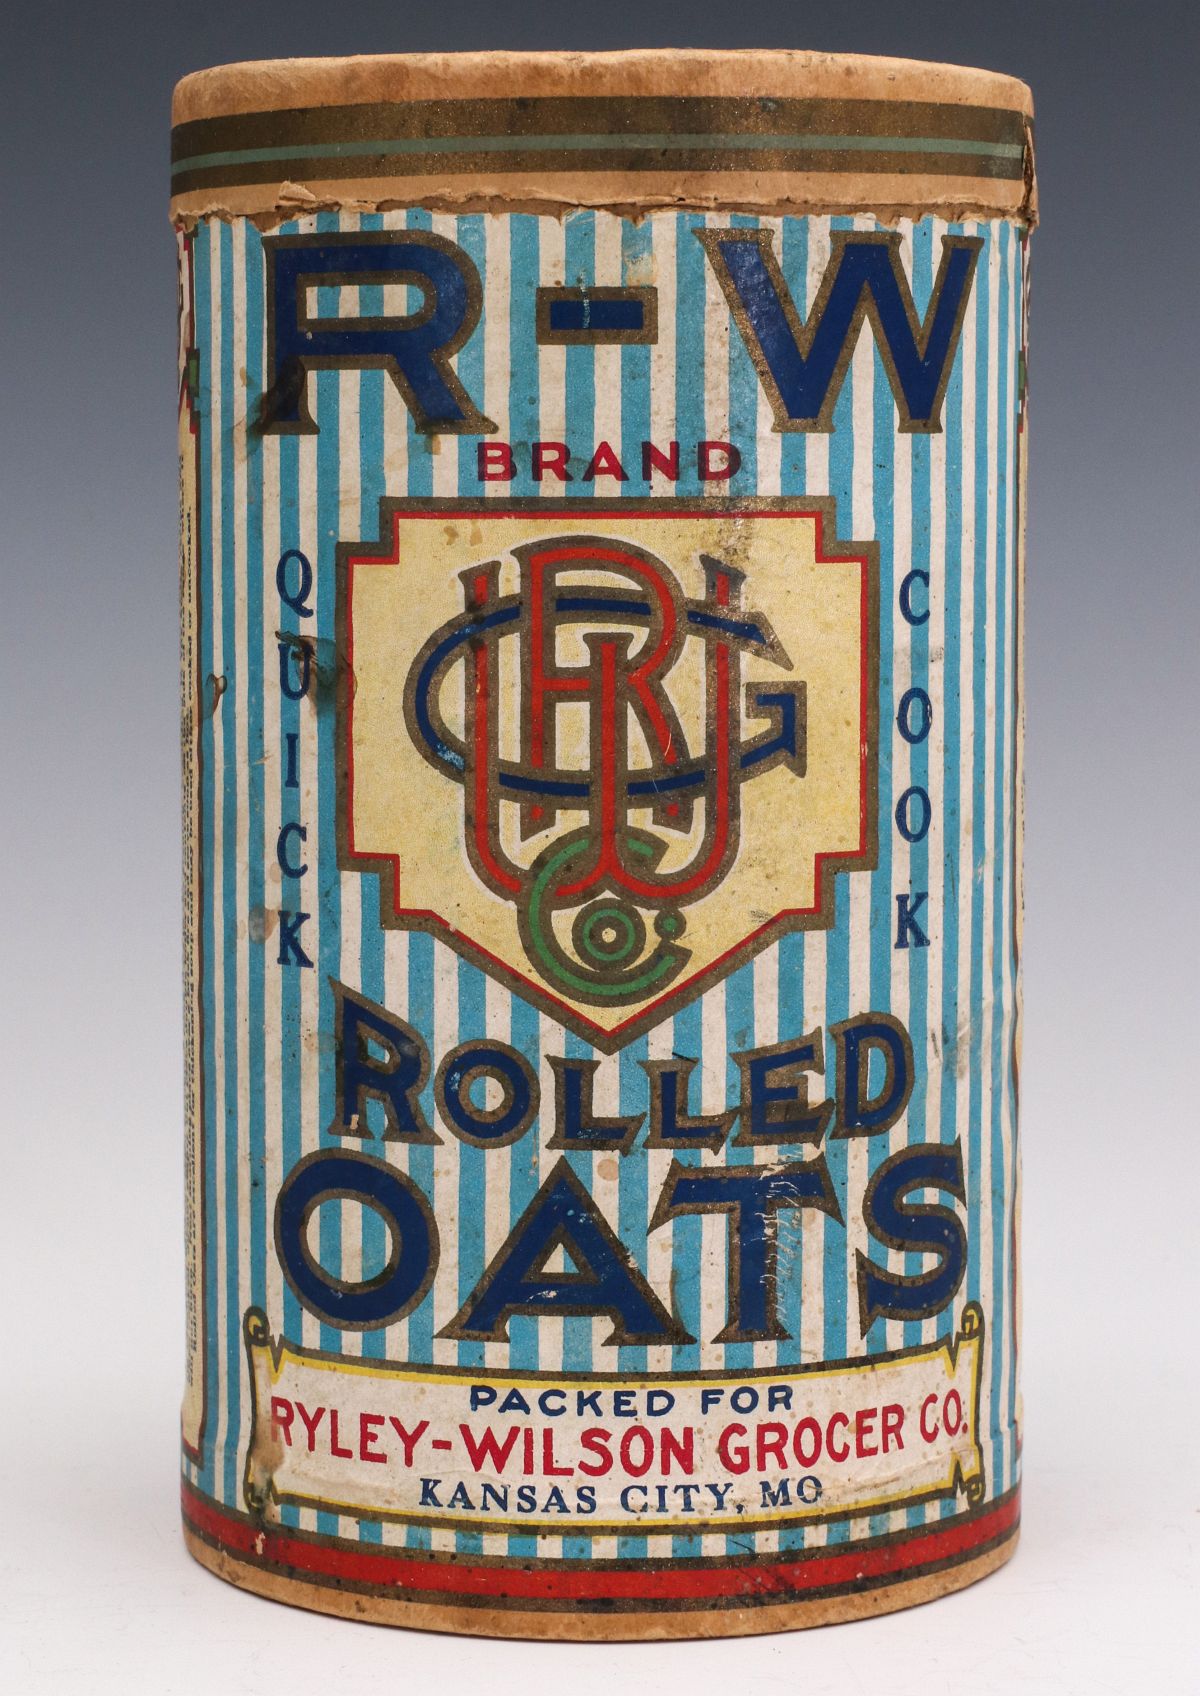 AN R-W BRAND ROLLED OATS CONTAINER, KANSAS CITY